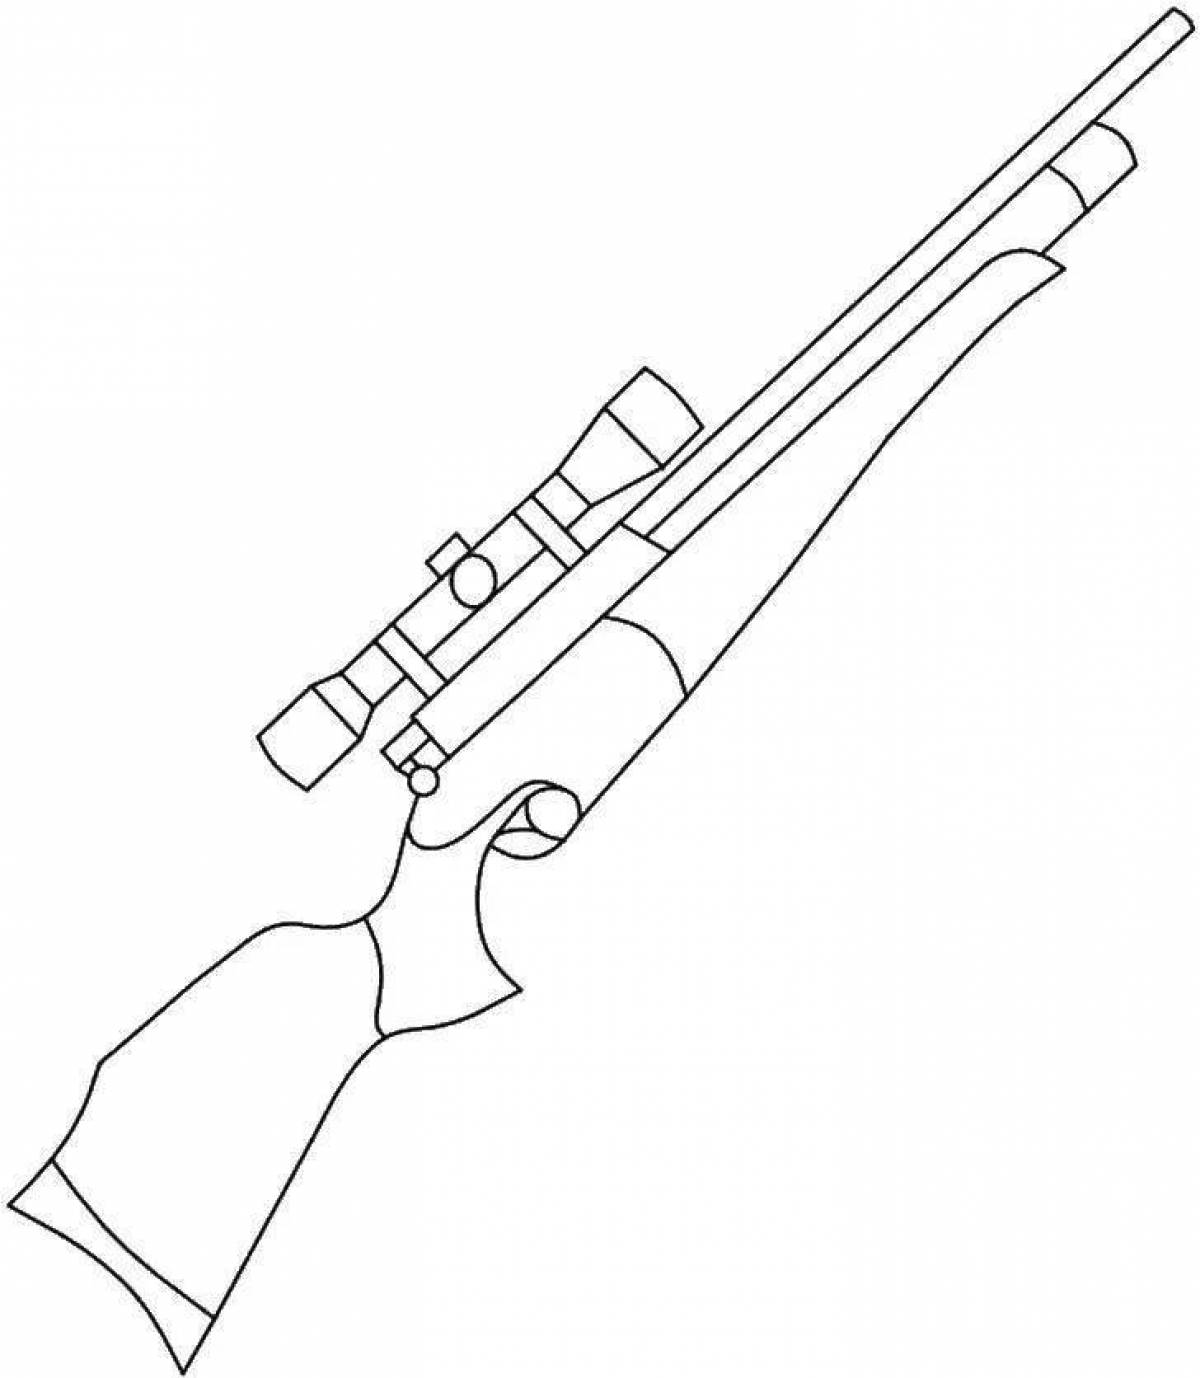 Radiant sniper rifle coloring page